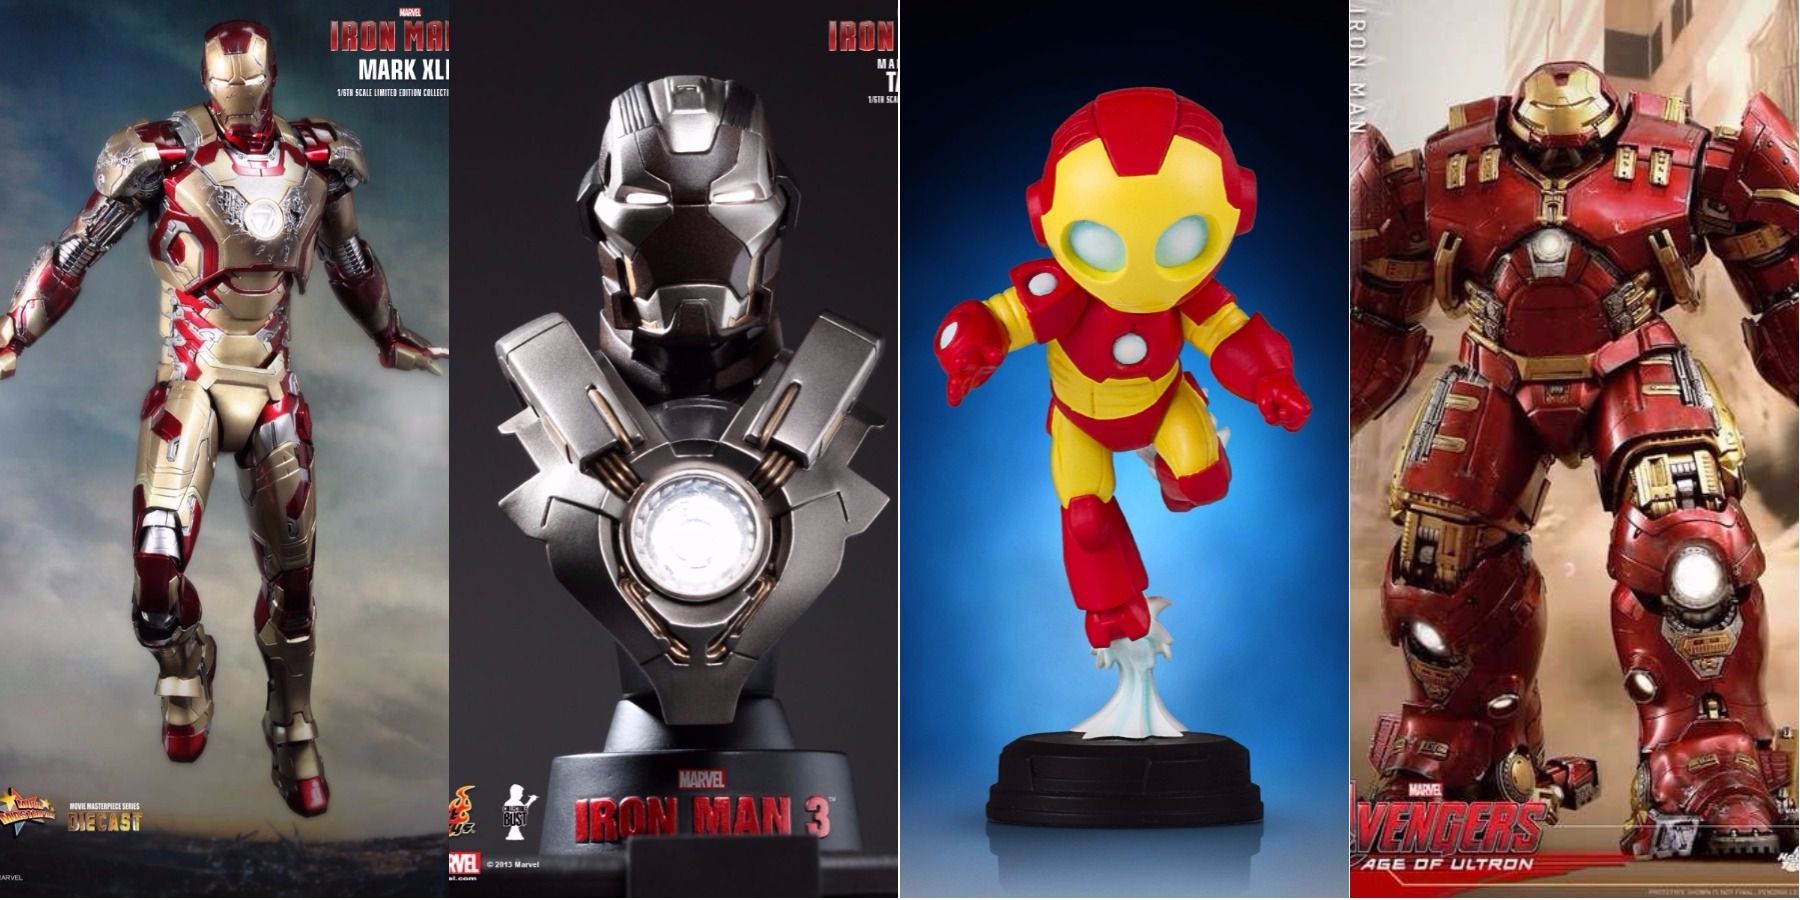 1:1 Creative Kids Gift DIY Accessory LED Light Hand Cannon for Iron Man Toys DIY 